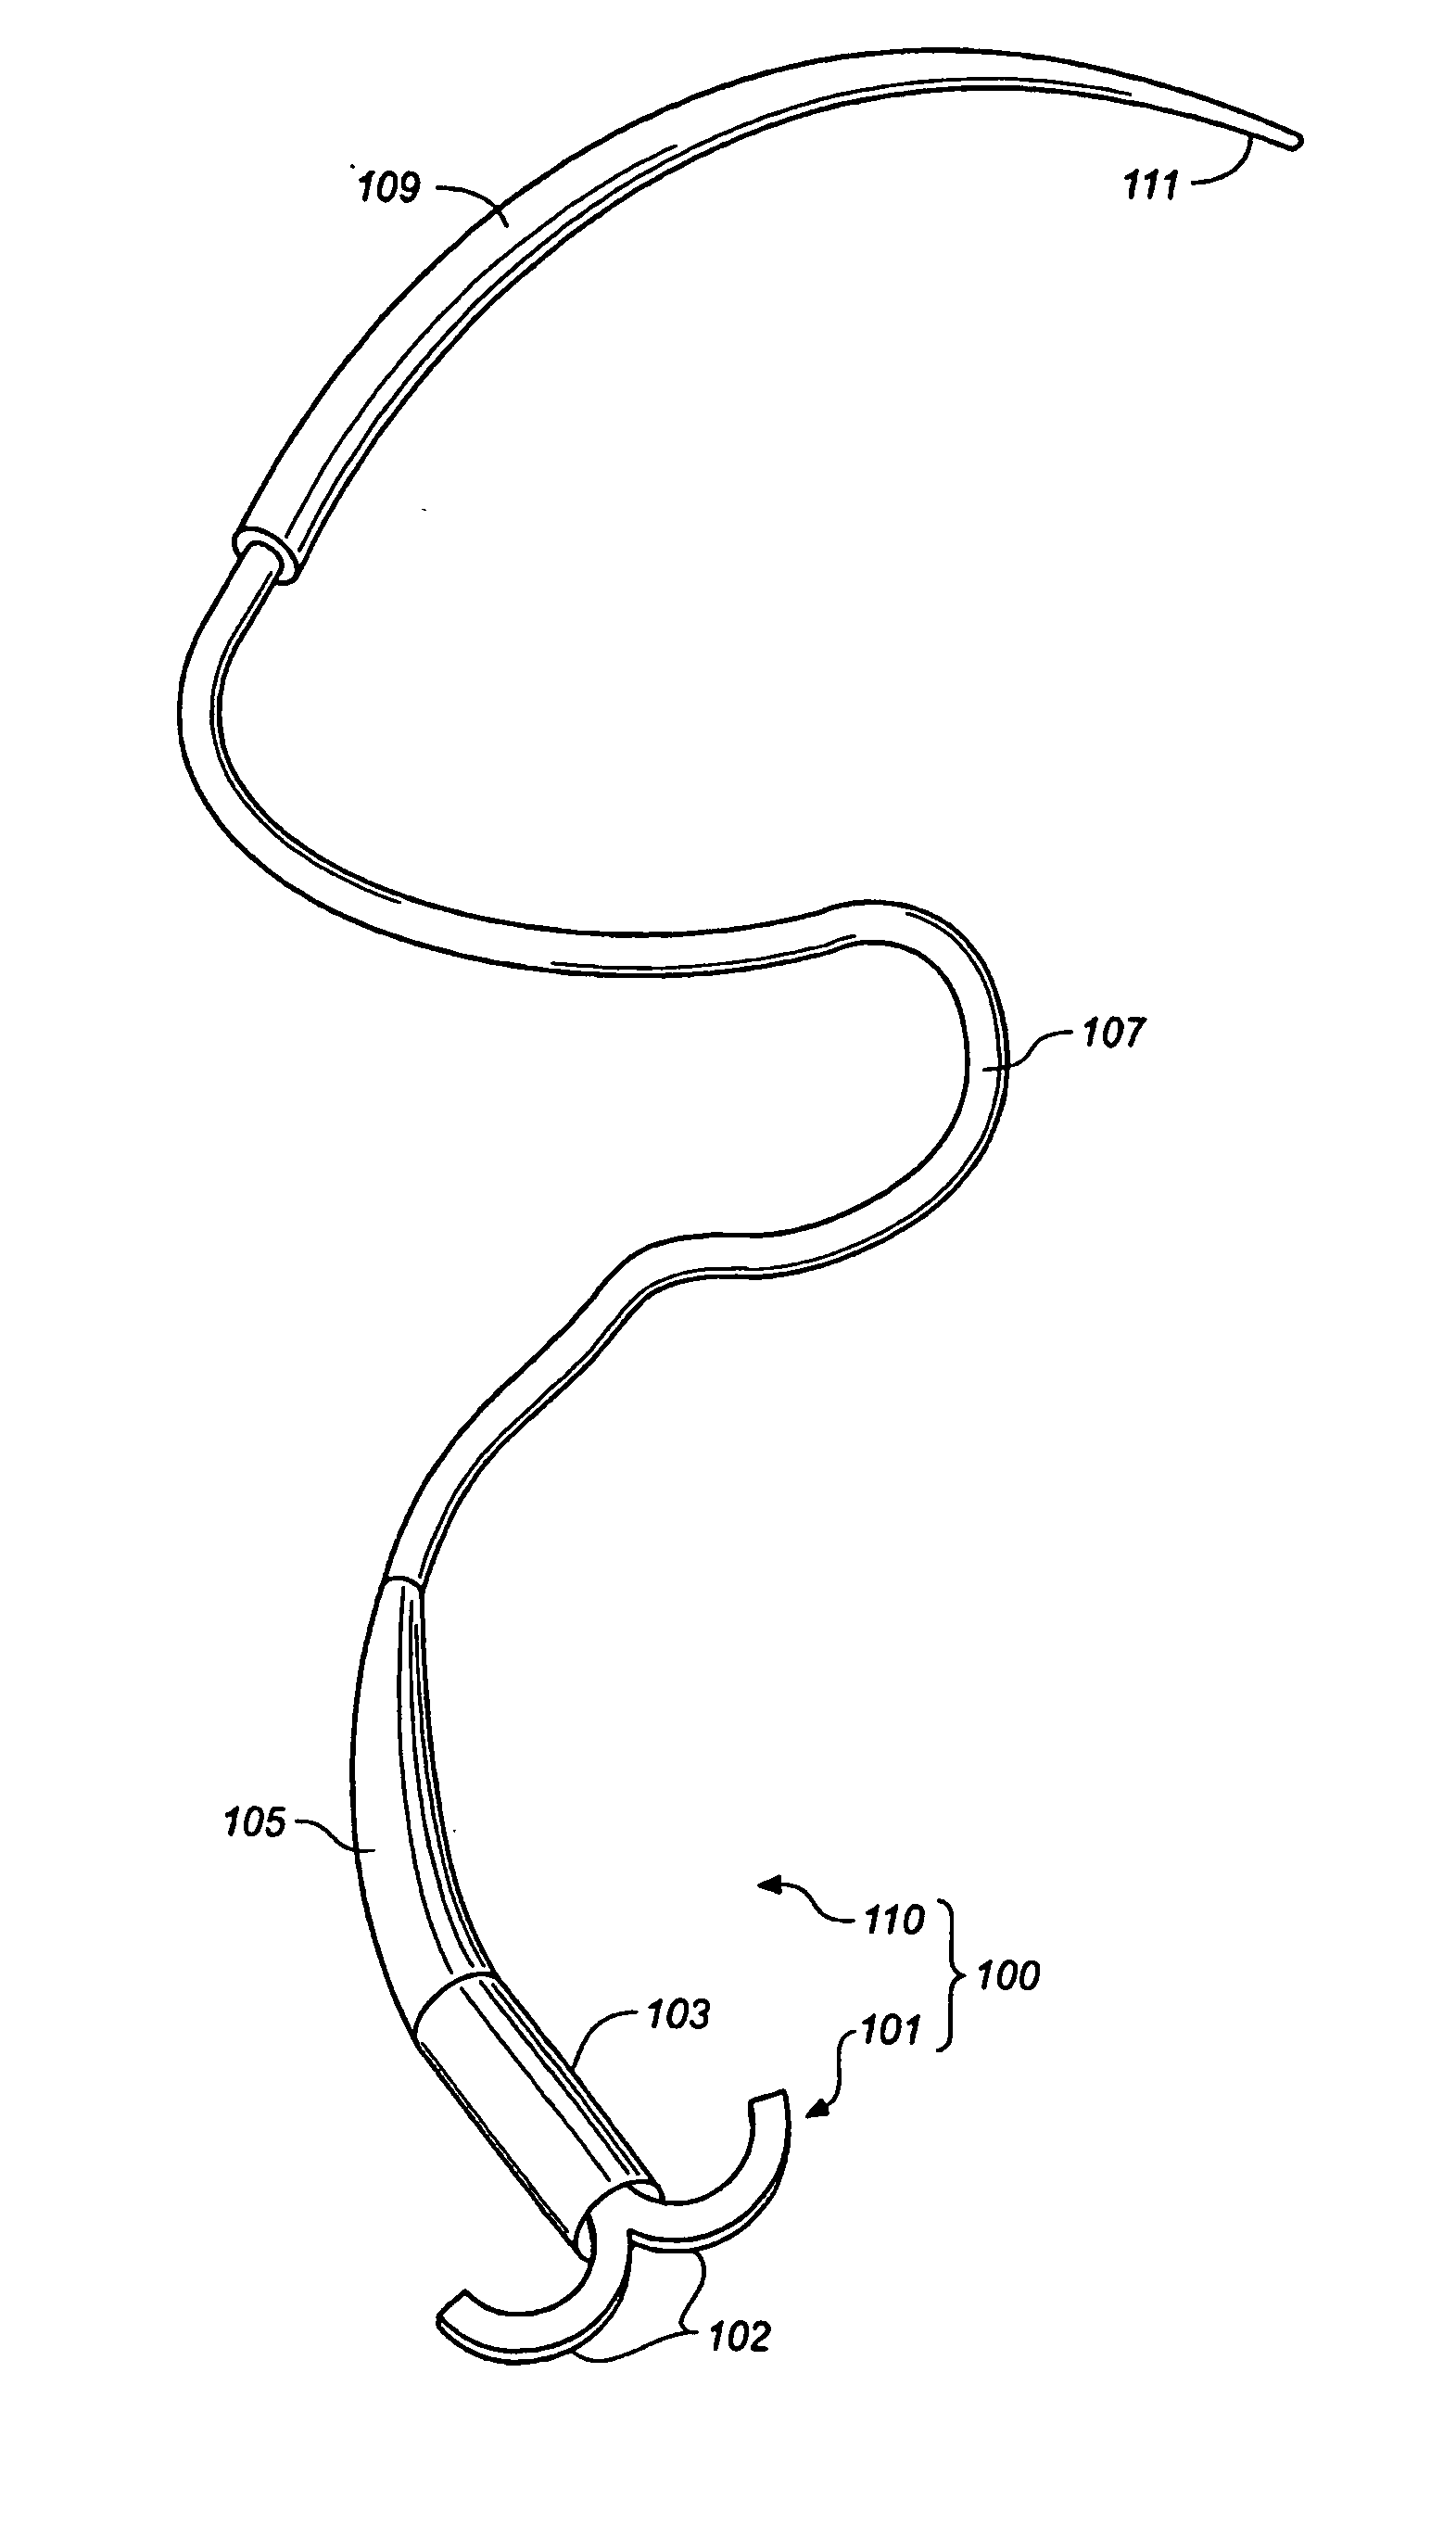 Self-closing surgical clip for tissue